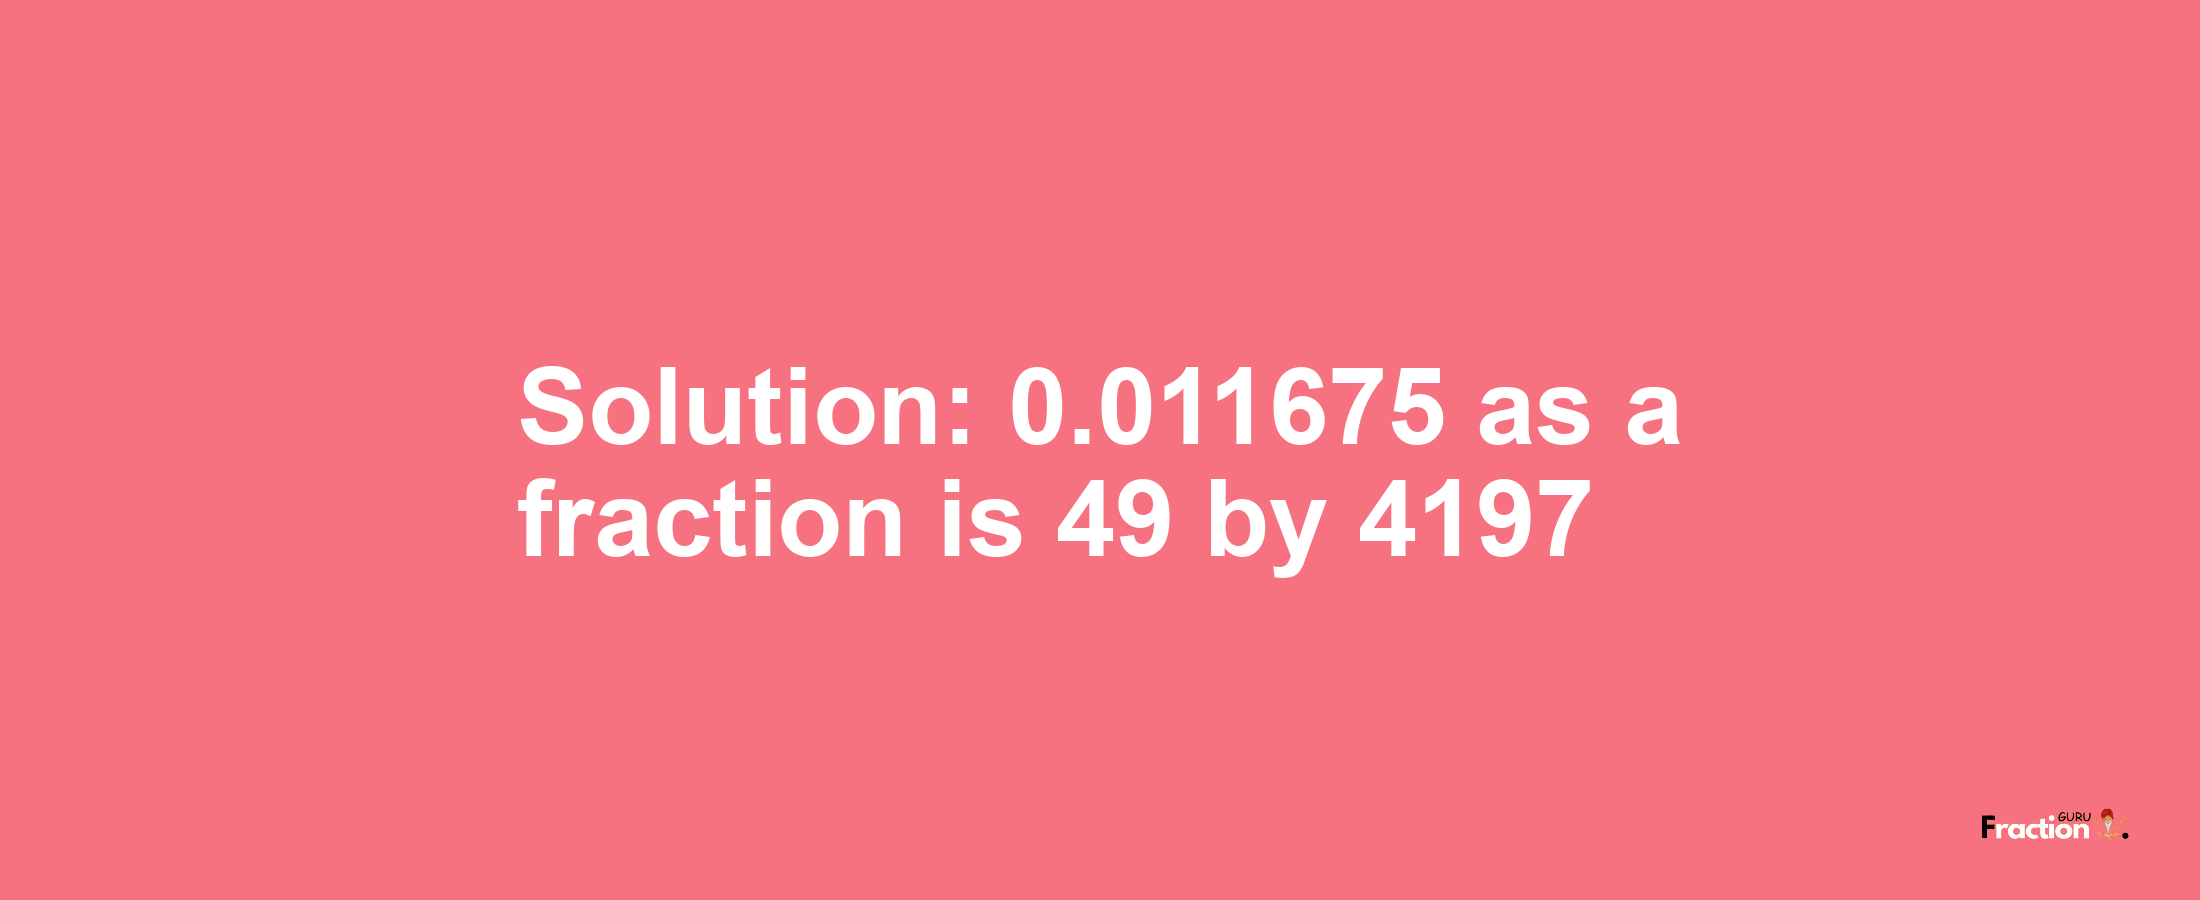 Solution:0.011675 as a fraction is 49/4197